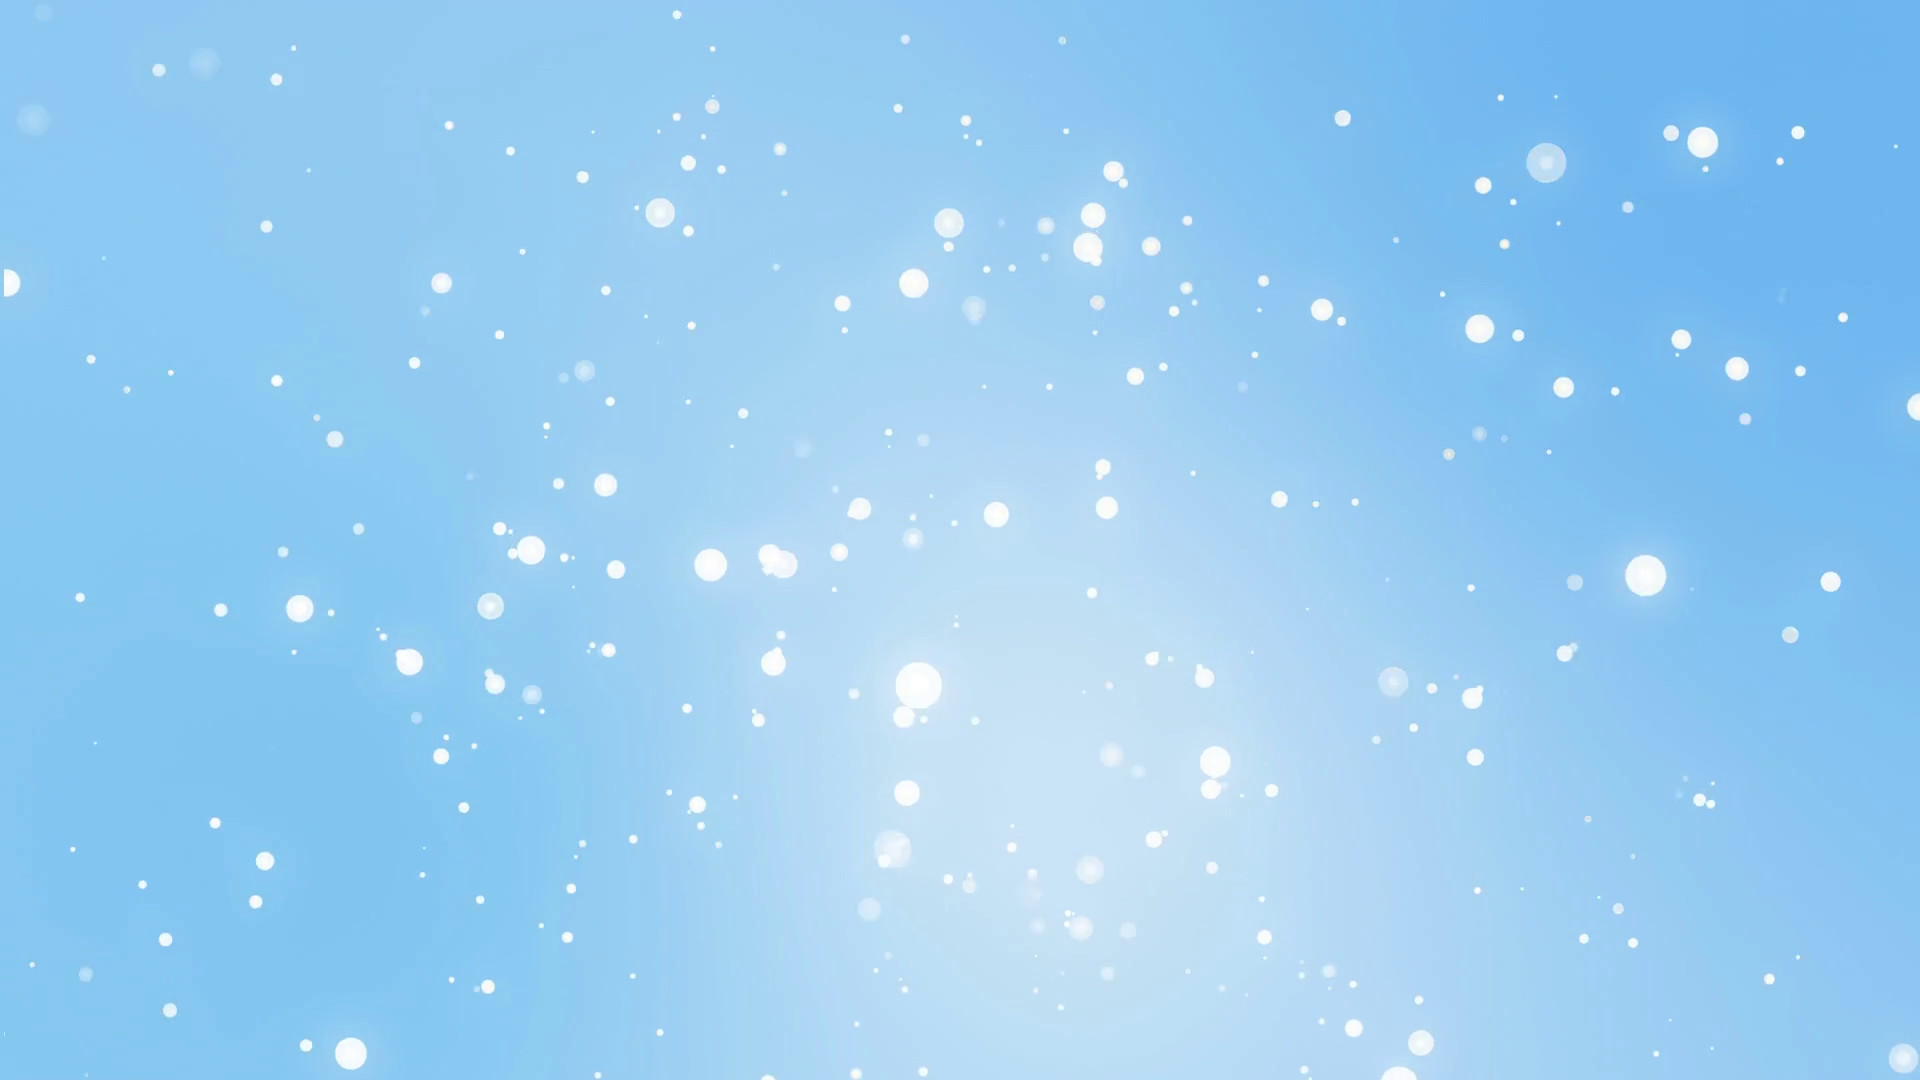 1920x1080 Glowing white snowflake particles falling down against a light blue  gradient Christmas background